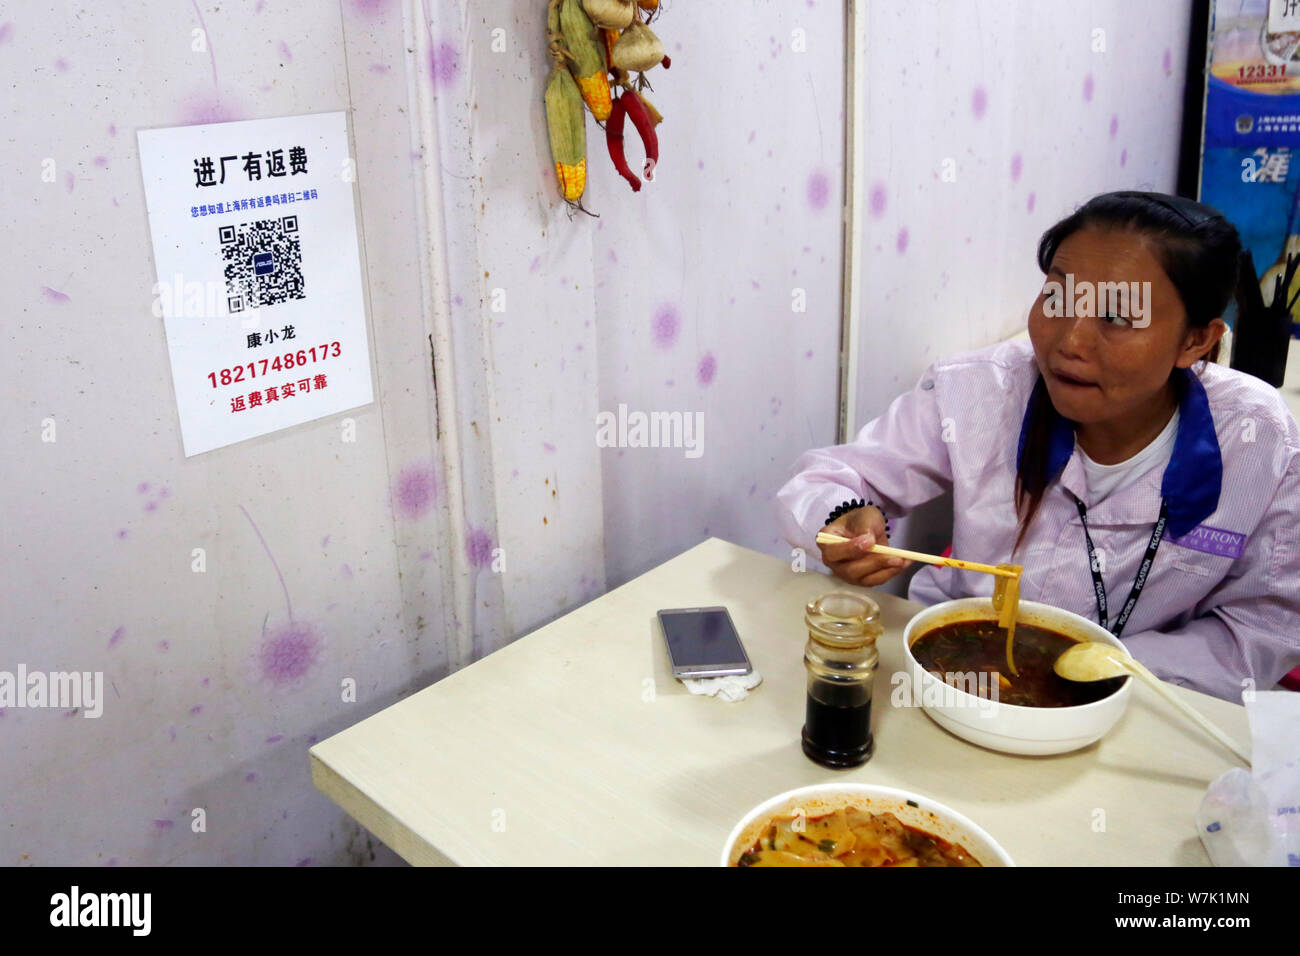 A Chinese worker eats meal at a roadside restaurant after leaving work outside the Pegatron Changshuo factory for the assembly of Apple's iPhone and o Stock Photo